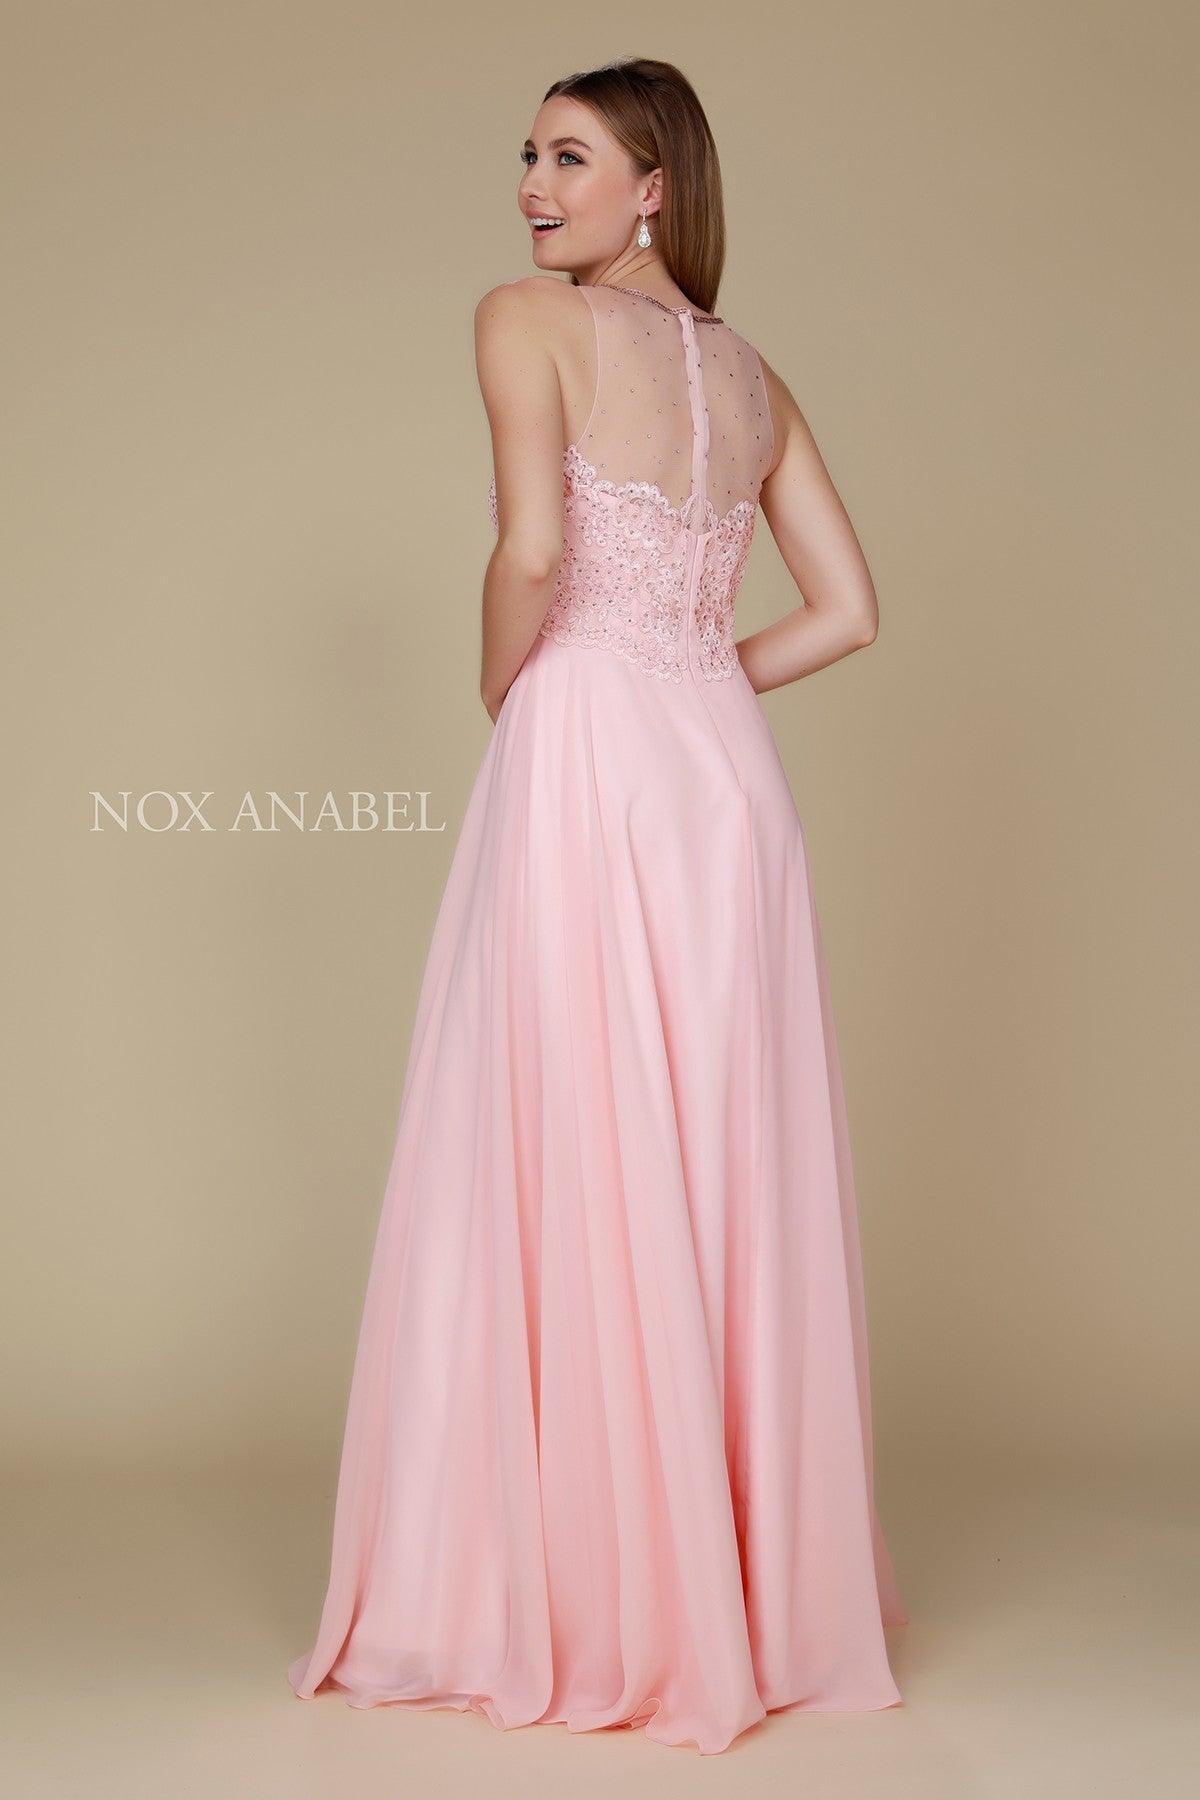 Long High Neck Formal Bridesmaid Dress - The Dress Outlet